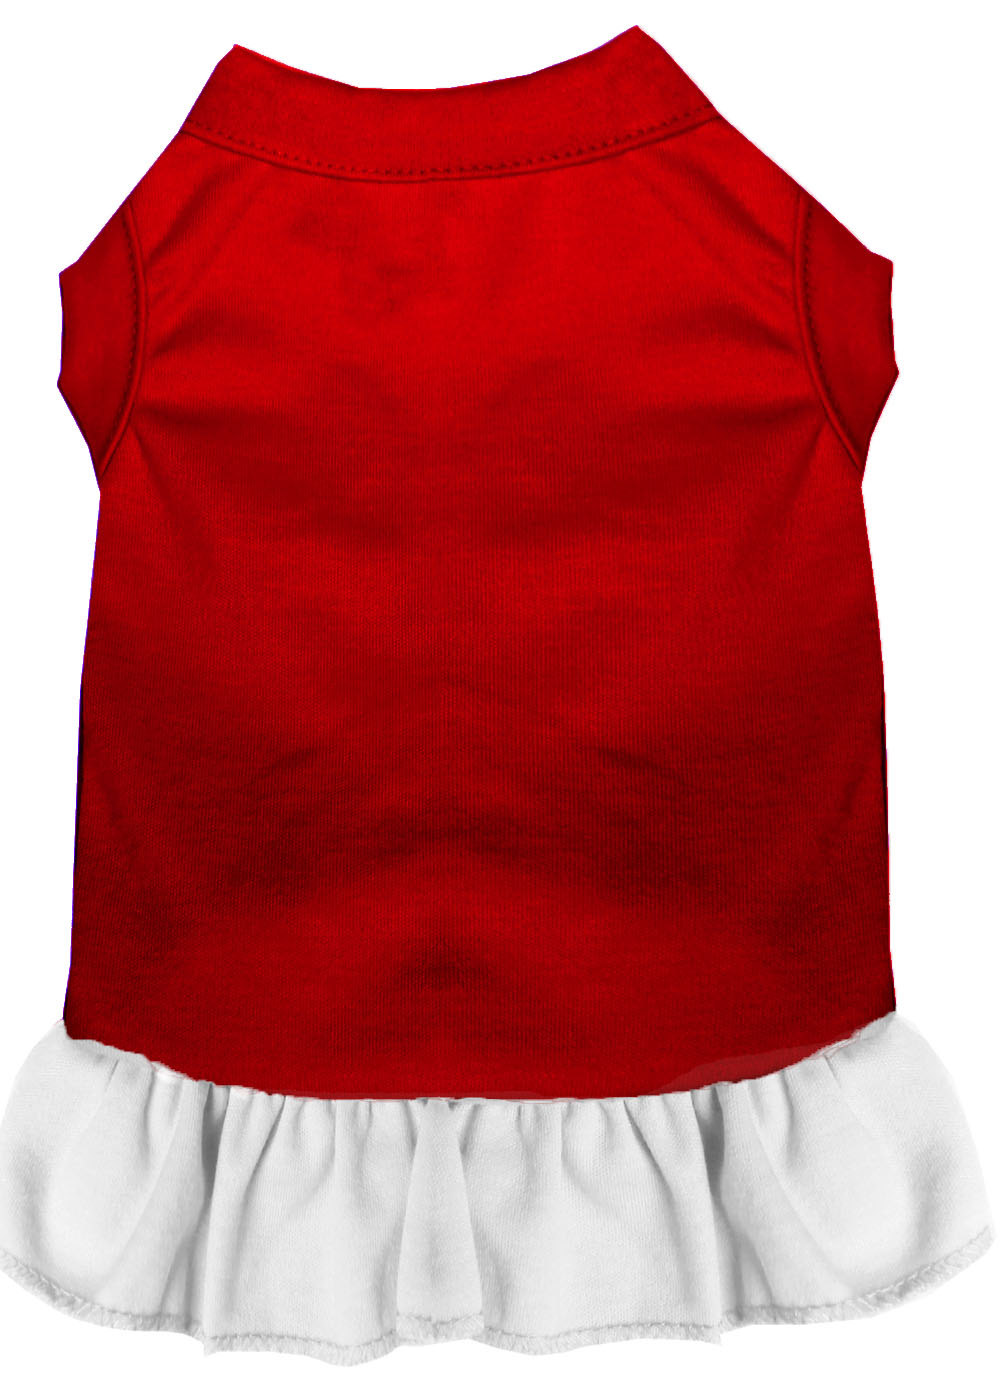 Plain Pet Dress Red with White Lg